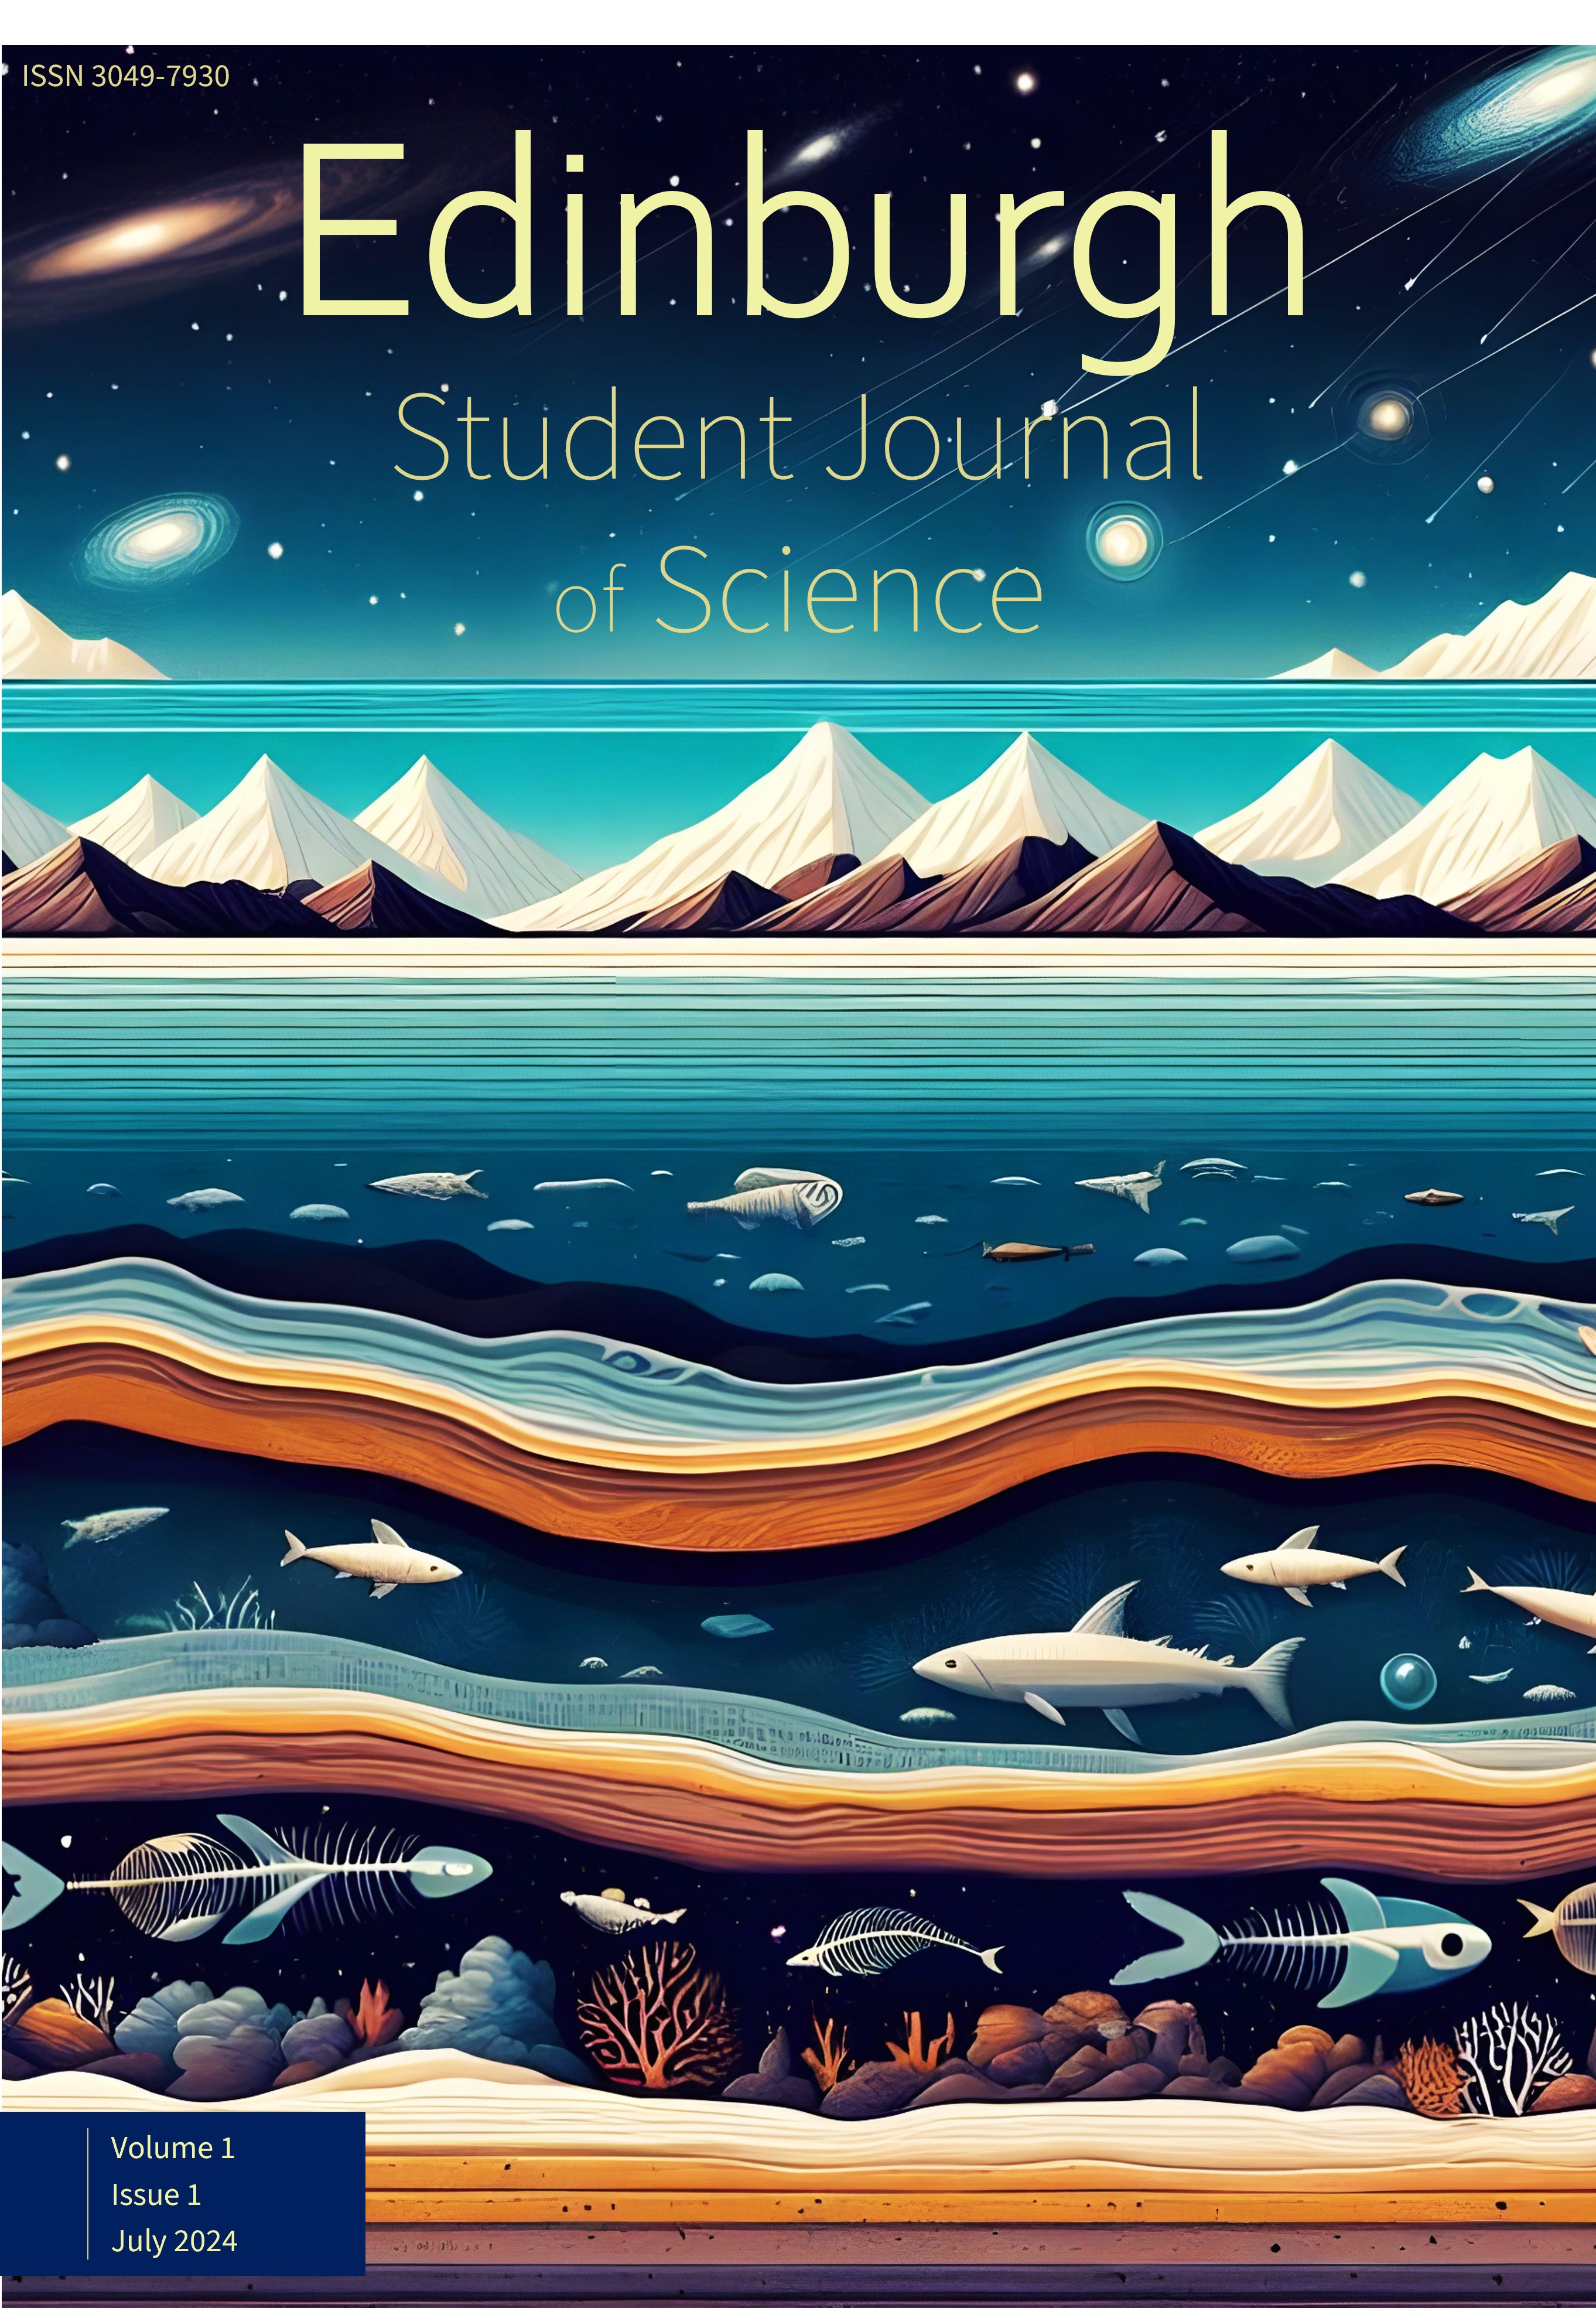 Journal cover of the Edinburgh Student Journal of Science Volume 1, Issue 1, which features a layered illustration of layers of sediments and water under the ocean, alongside fossilised and living marine life, topped with snowcapped mountains and galaxies among the stars.